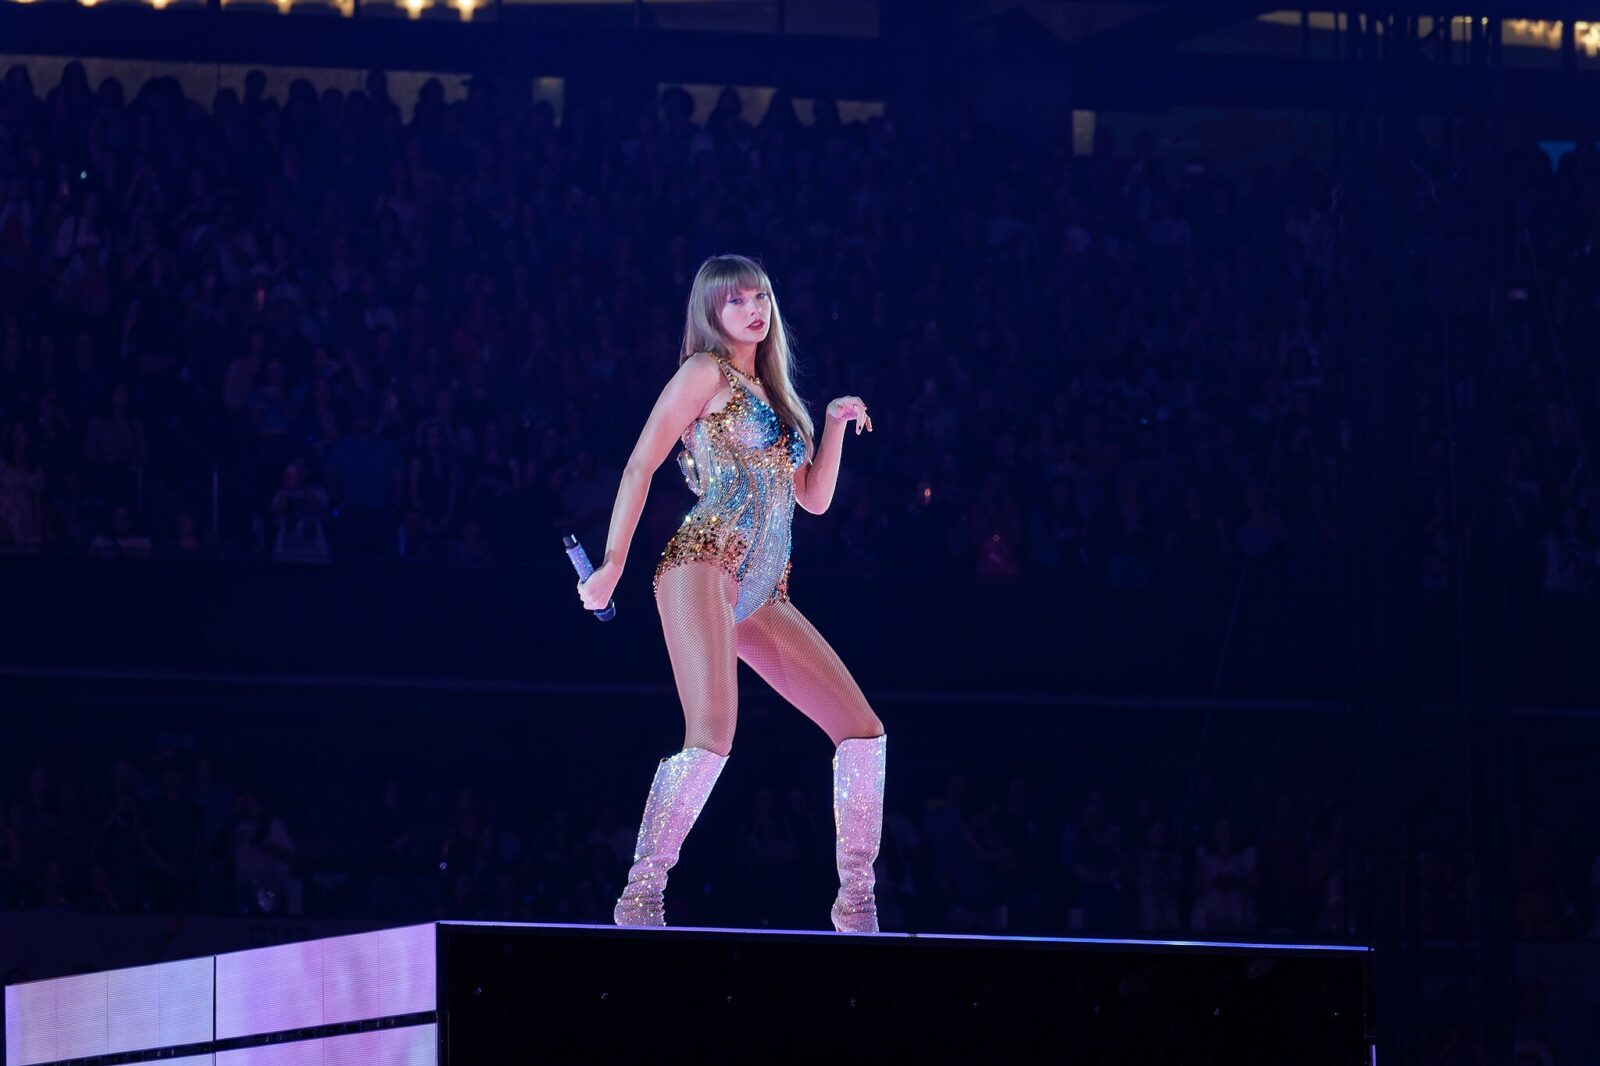 Taylor Swift performing at the Eras tour in the USA ahead of the UK leg